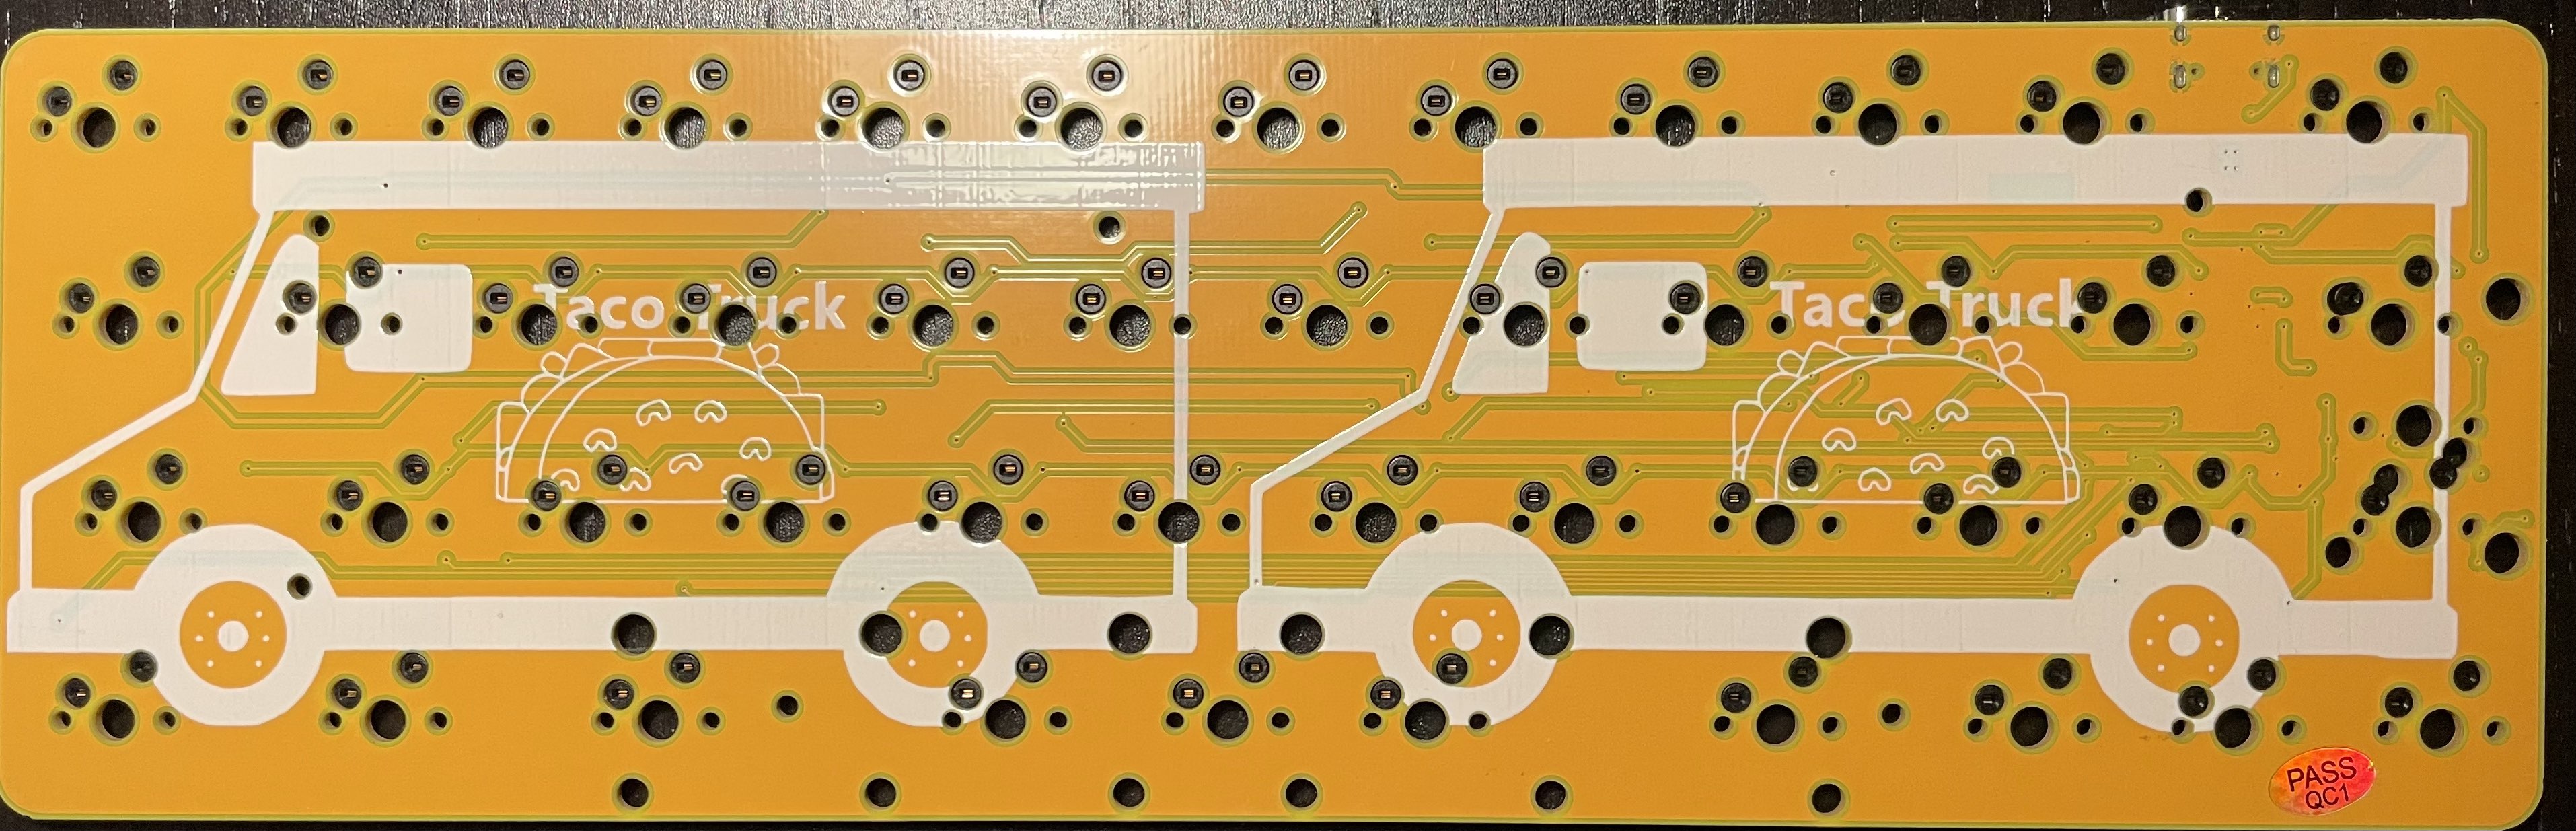 Front of a Rev 1 PCB